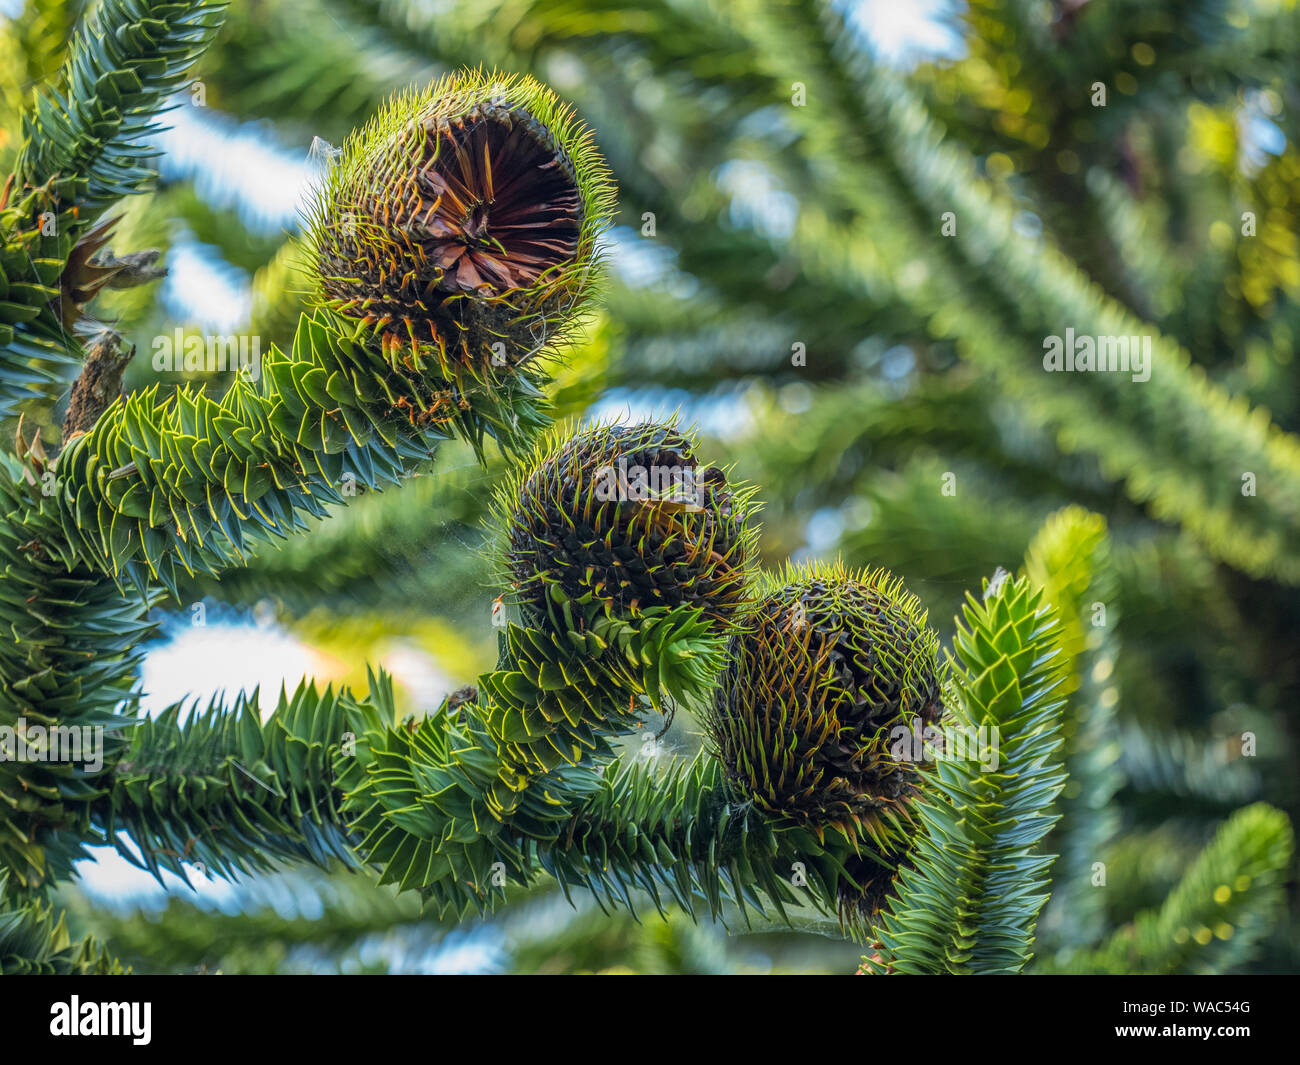 Close Up Of The Female Fruit of the Monkey Puzzle Tree (Araucaria  araucana). The Nut-like Seeds Produced By The Female Cones Are Edible Stock  Photo - Alamy